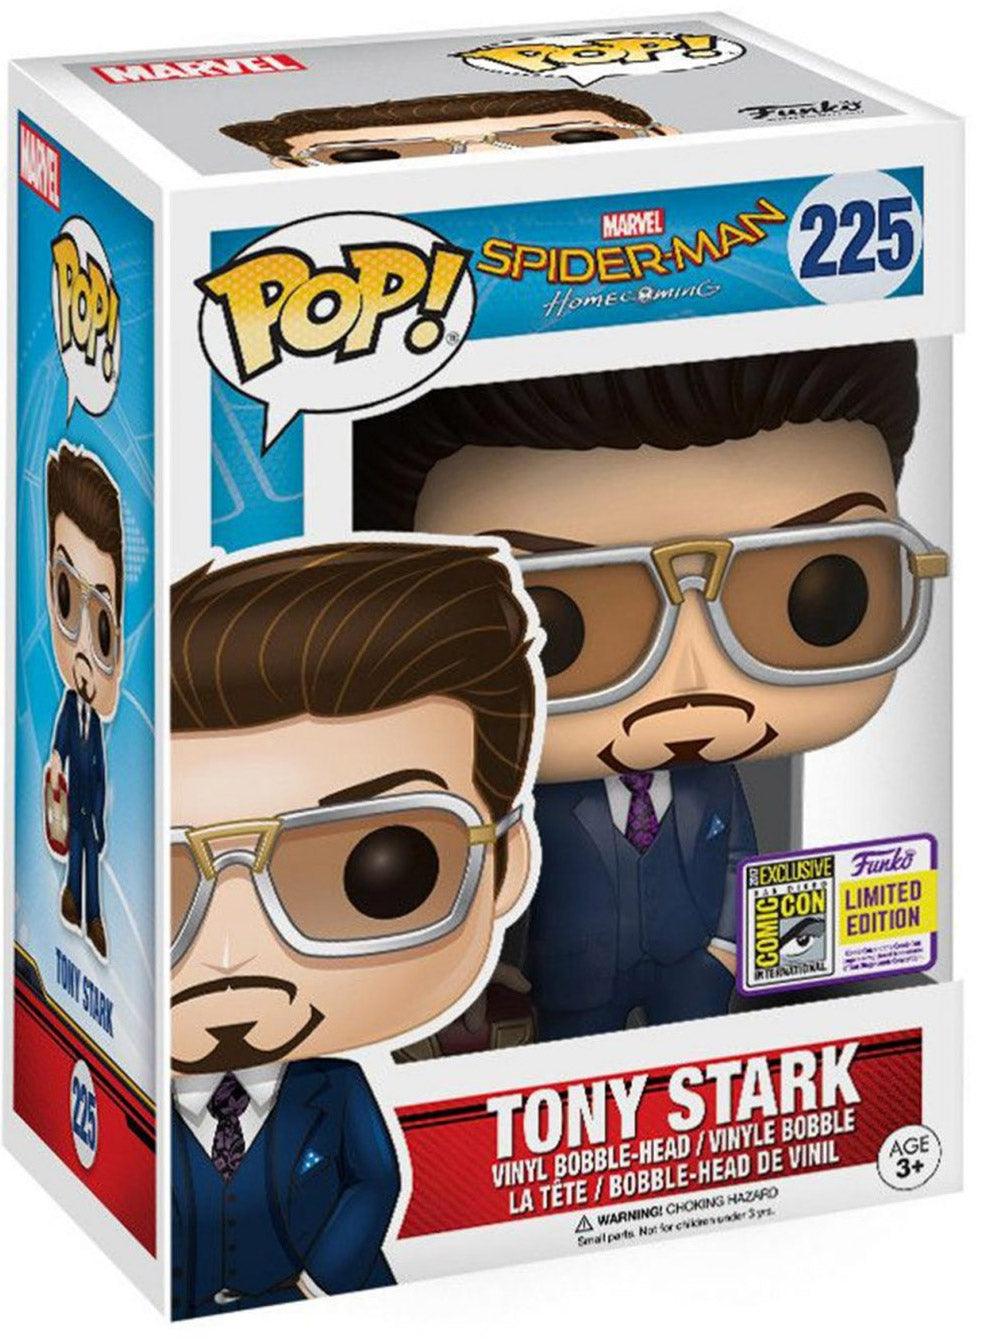 Pop! Marvel - Spider-Man Homecoming - Tony Stark - #225 - EXCLUSIVE 2016 San Diego Comic Con LIMITED EDITION - Hobby Champion Inc